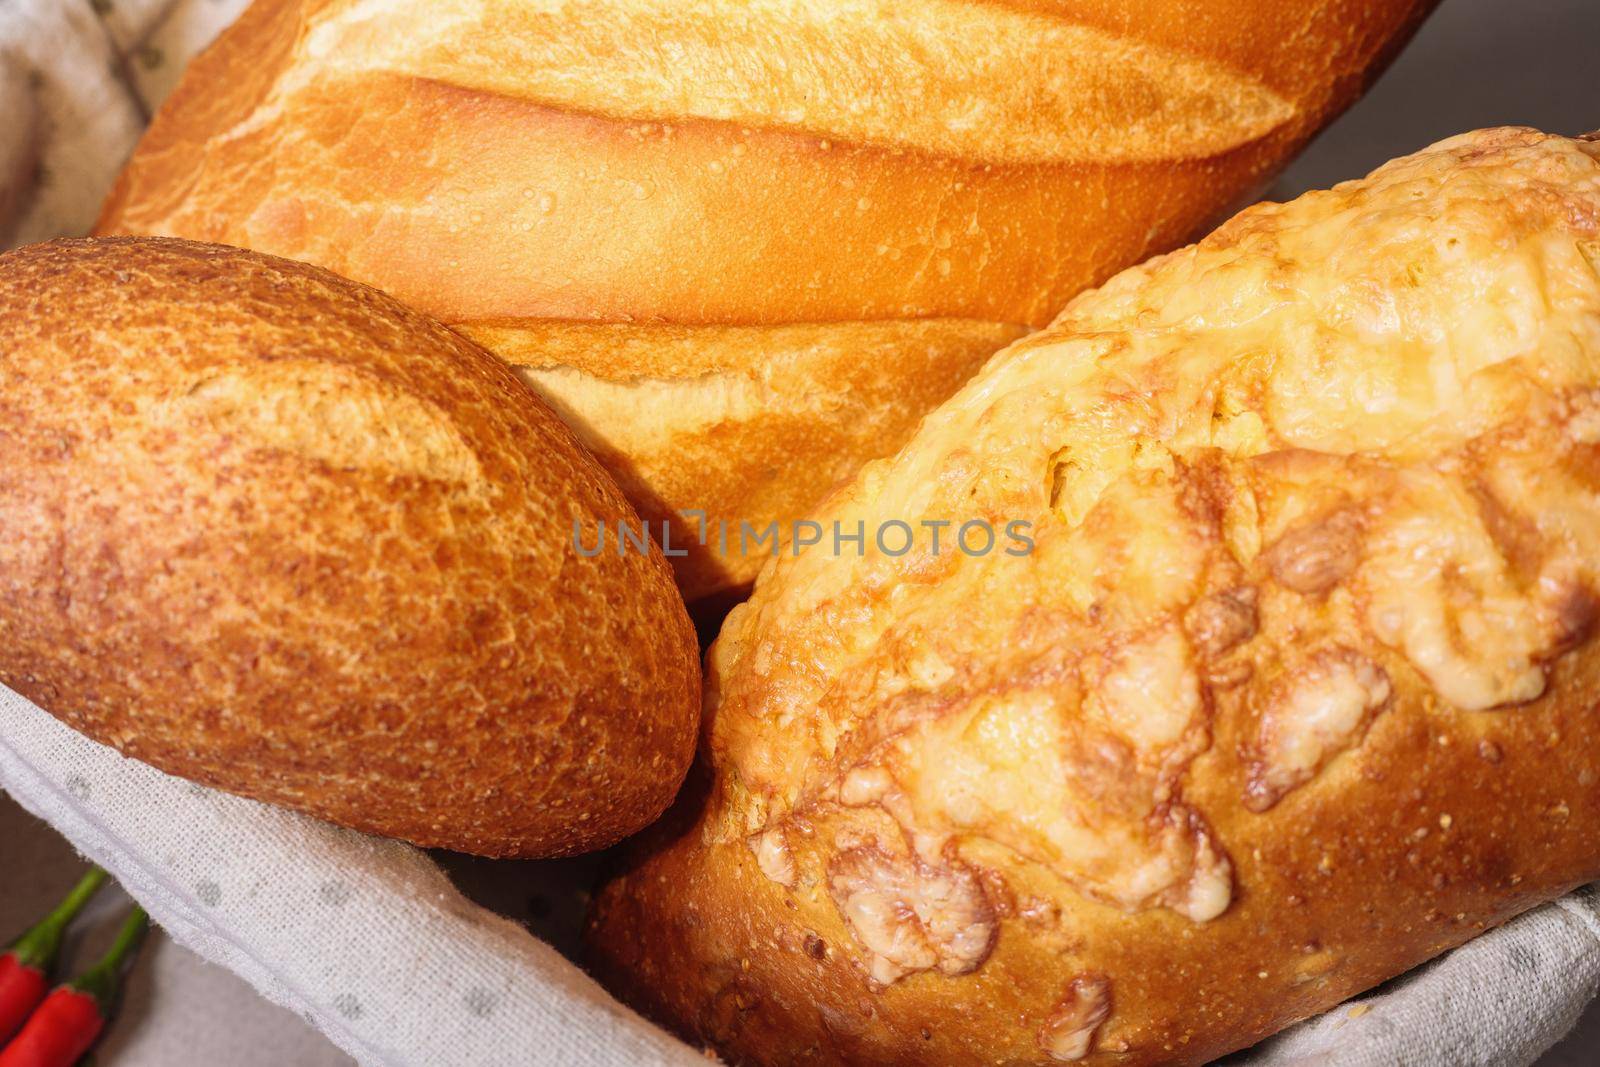 Fresh bread in a basket on a table with a fried crust. Close-up